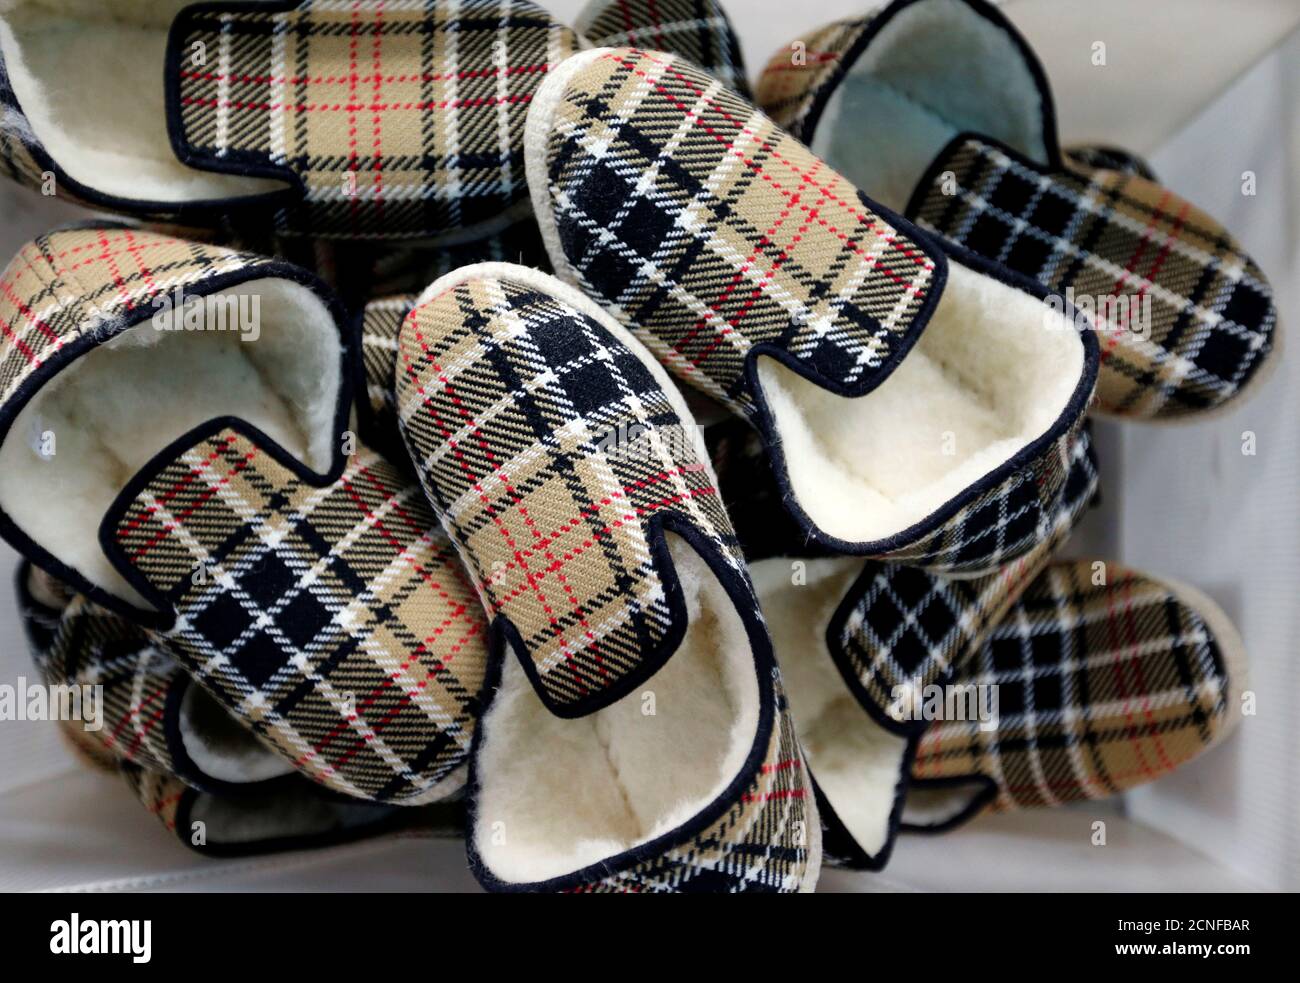 Charentaise slippers are pictured at the Maison Rondinaud company factory  in Rivieres, near La Rochefoucauld, in Charente region, France February 7,  2018. REUTERS/Regis Duvignau Stock Photo - Alamy